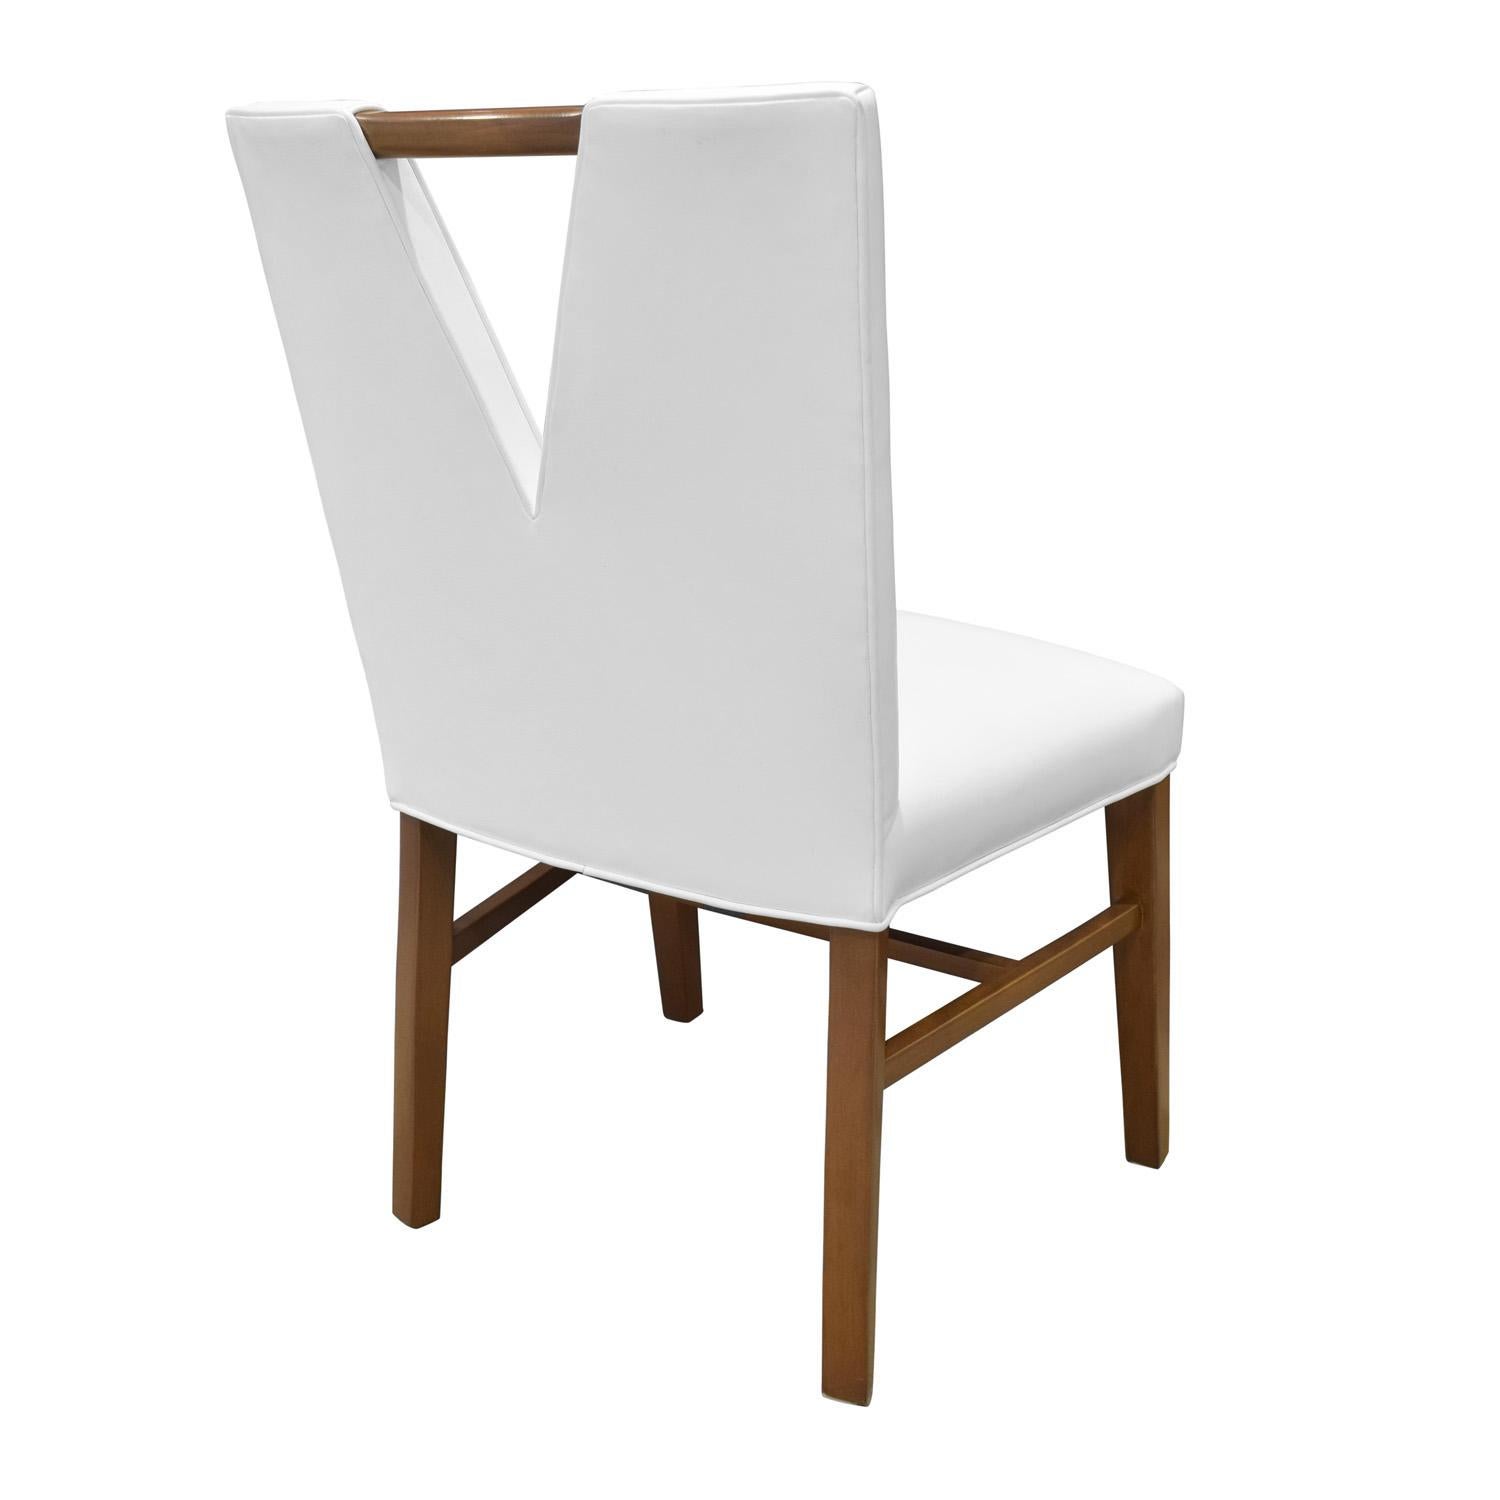 Hand-Crafted Paul Frankl Set of 6 Plunging Neckline Dining Chairs, 1950s